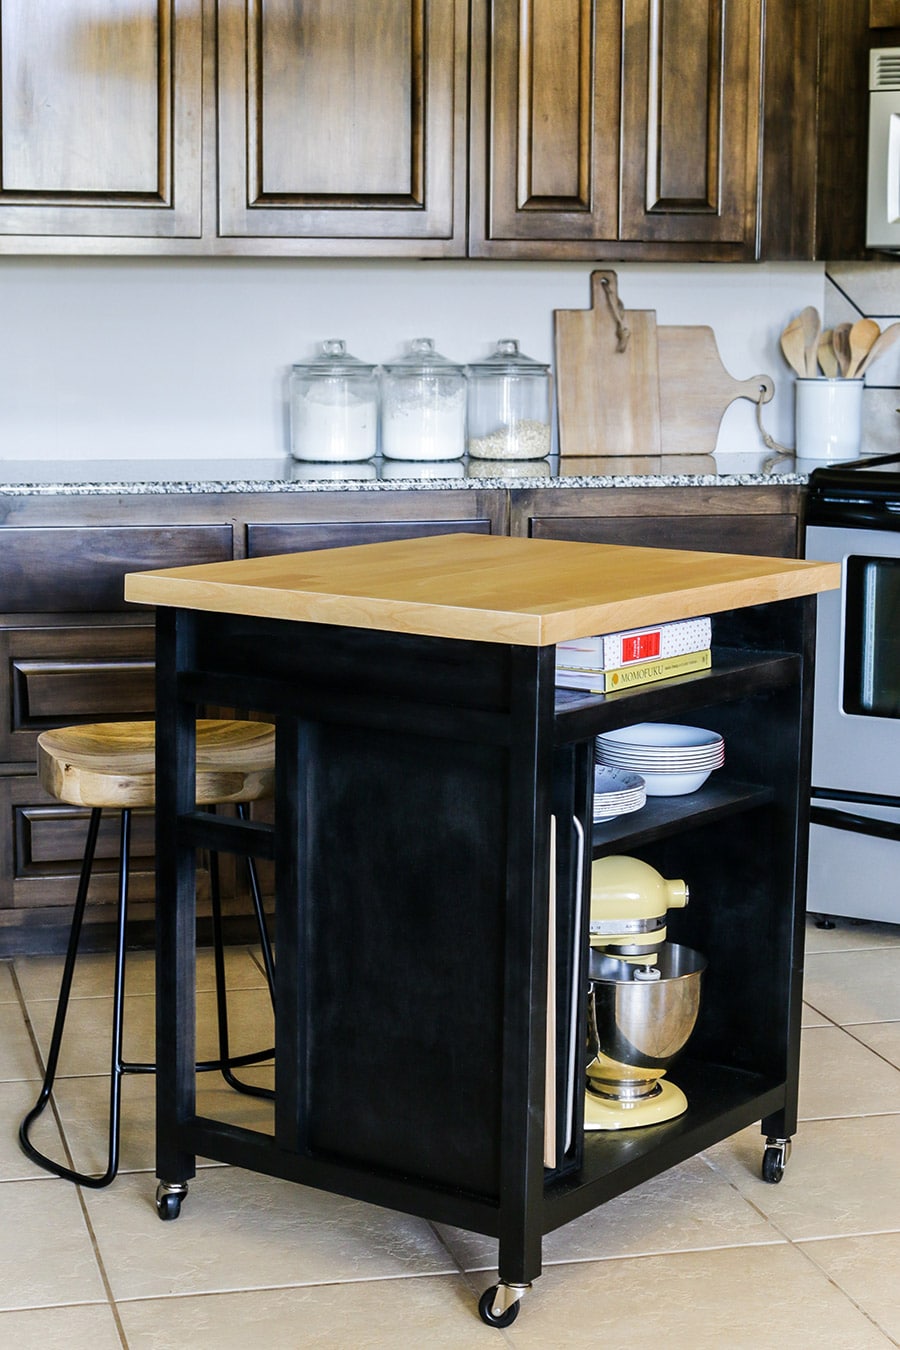 Need more workspace and storage in your kitchen? Learn how to build this DIY kitchen island on wheels! Free plans by Jen Woodhouse